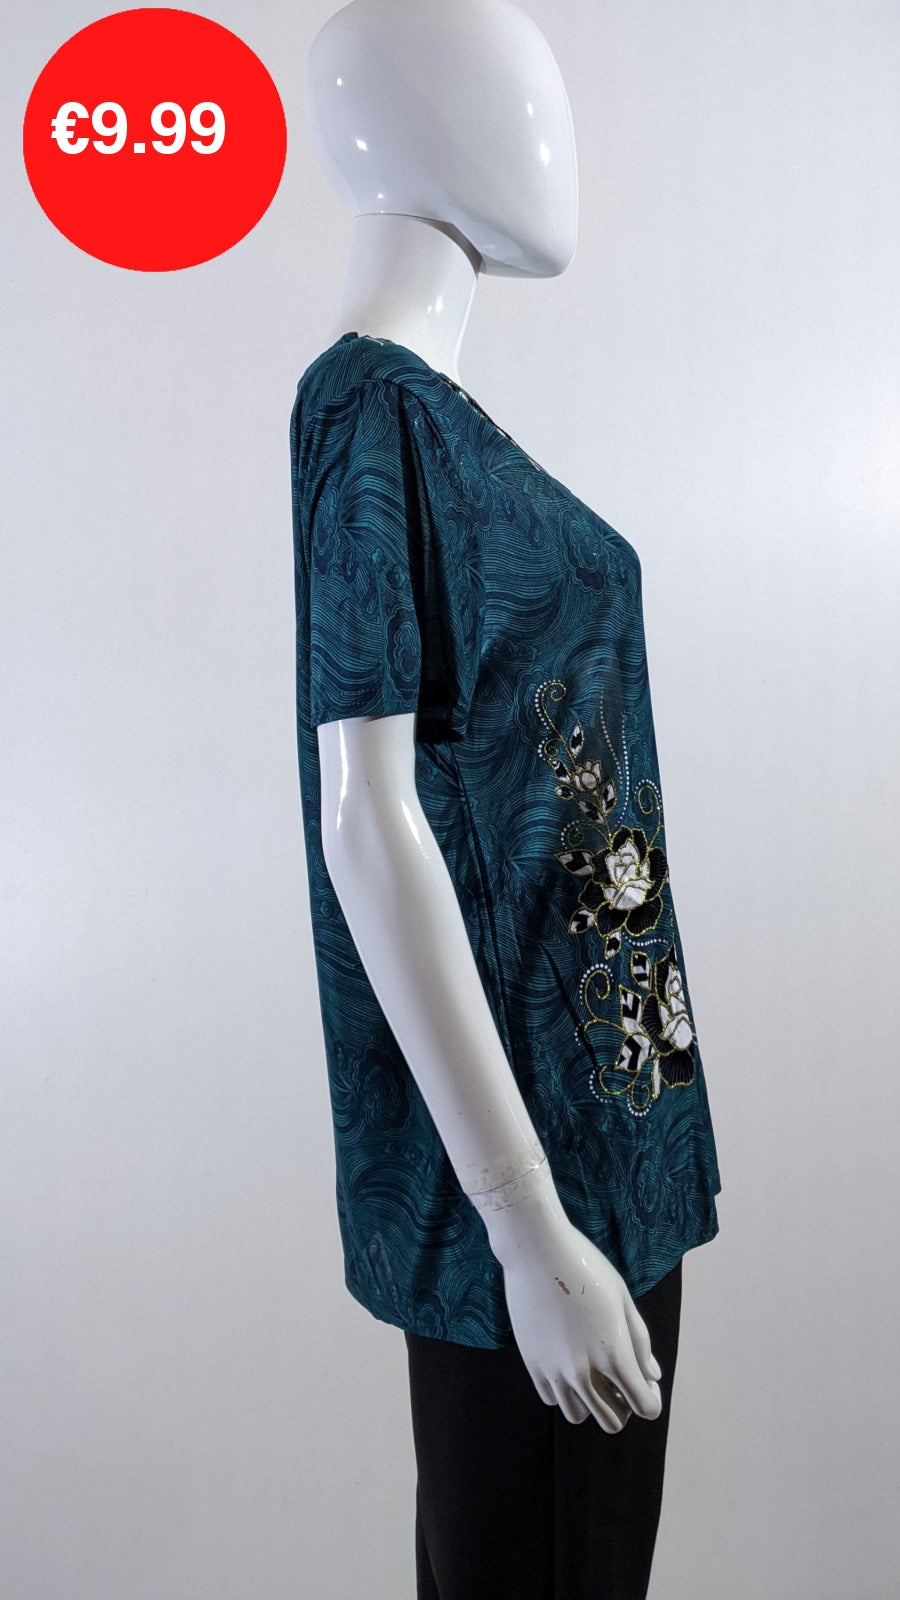 Teal Floral Embroidered Short Sleeve Top